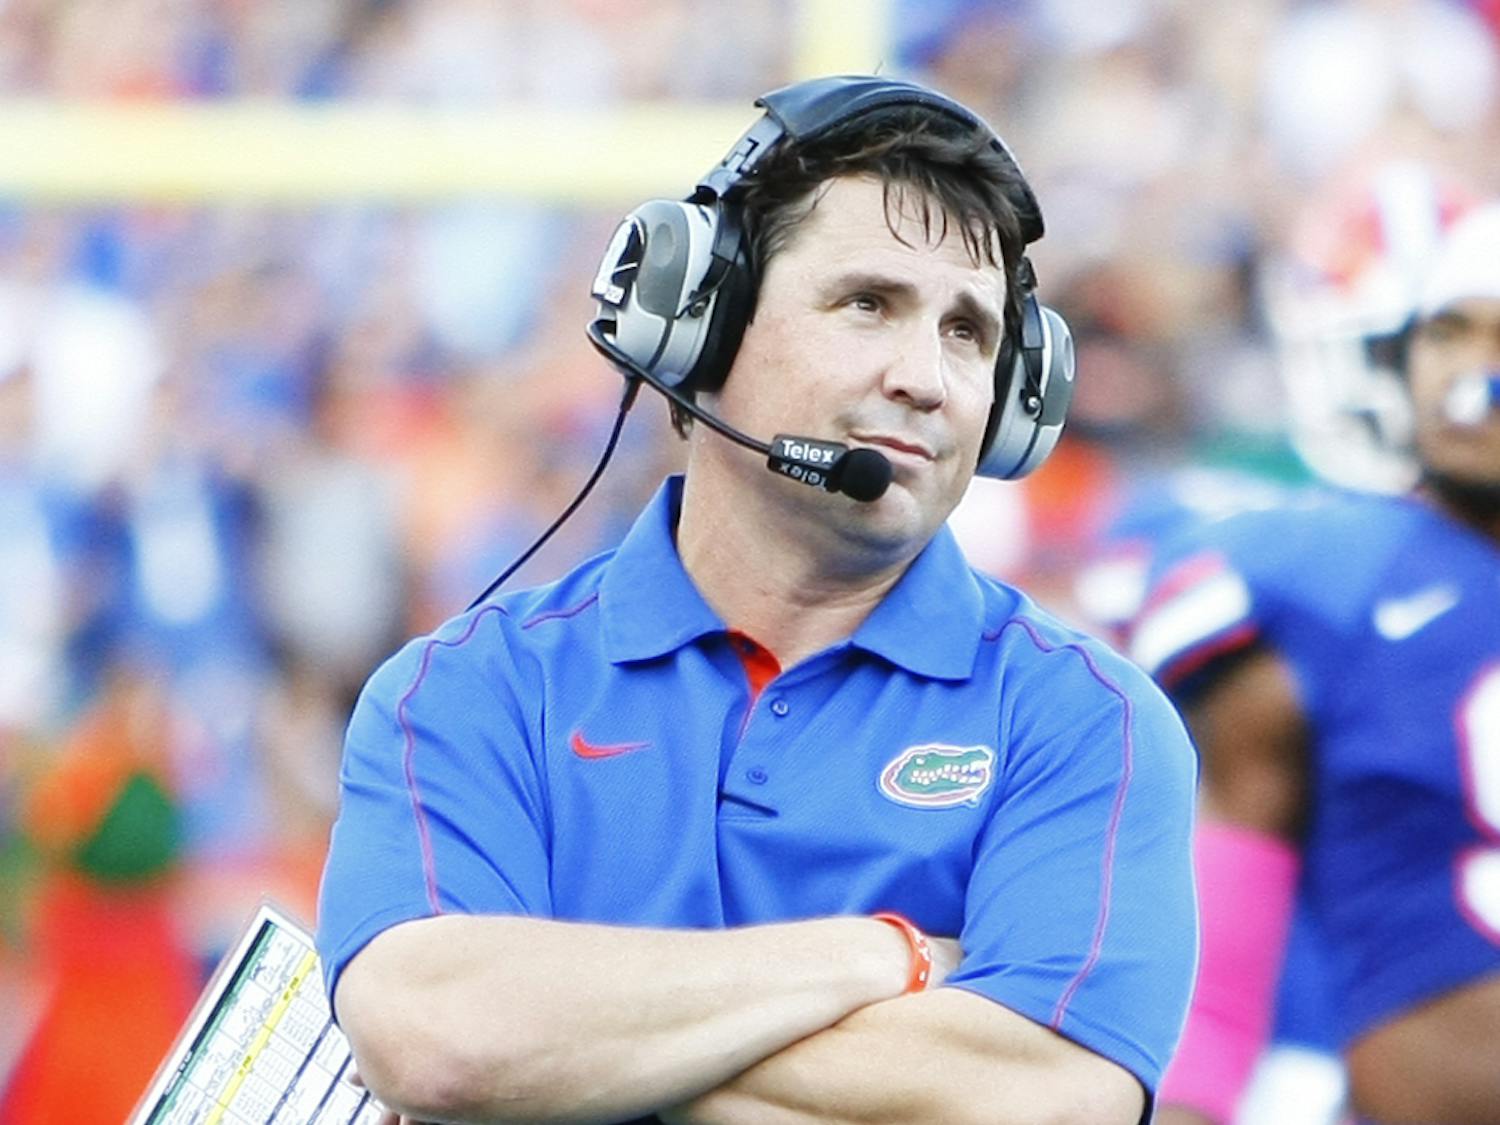 Coach Will Muschamp reacts to a replay on the Jumbotron during Florida’s 14-6 victory against LSU on Saturday at Ben Hill Griffin Stadium. Muschamp and the Gators are attempting to go 6-0 for just the eighth time in school history.